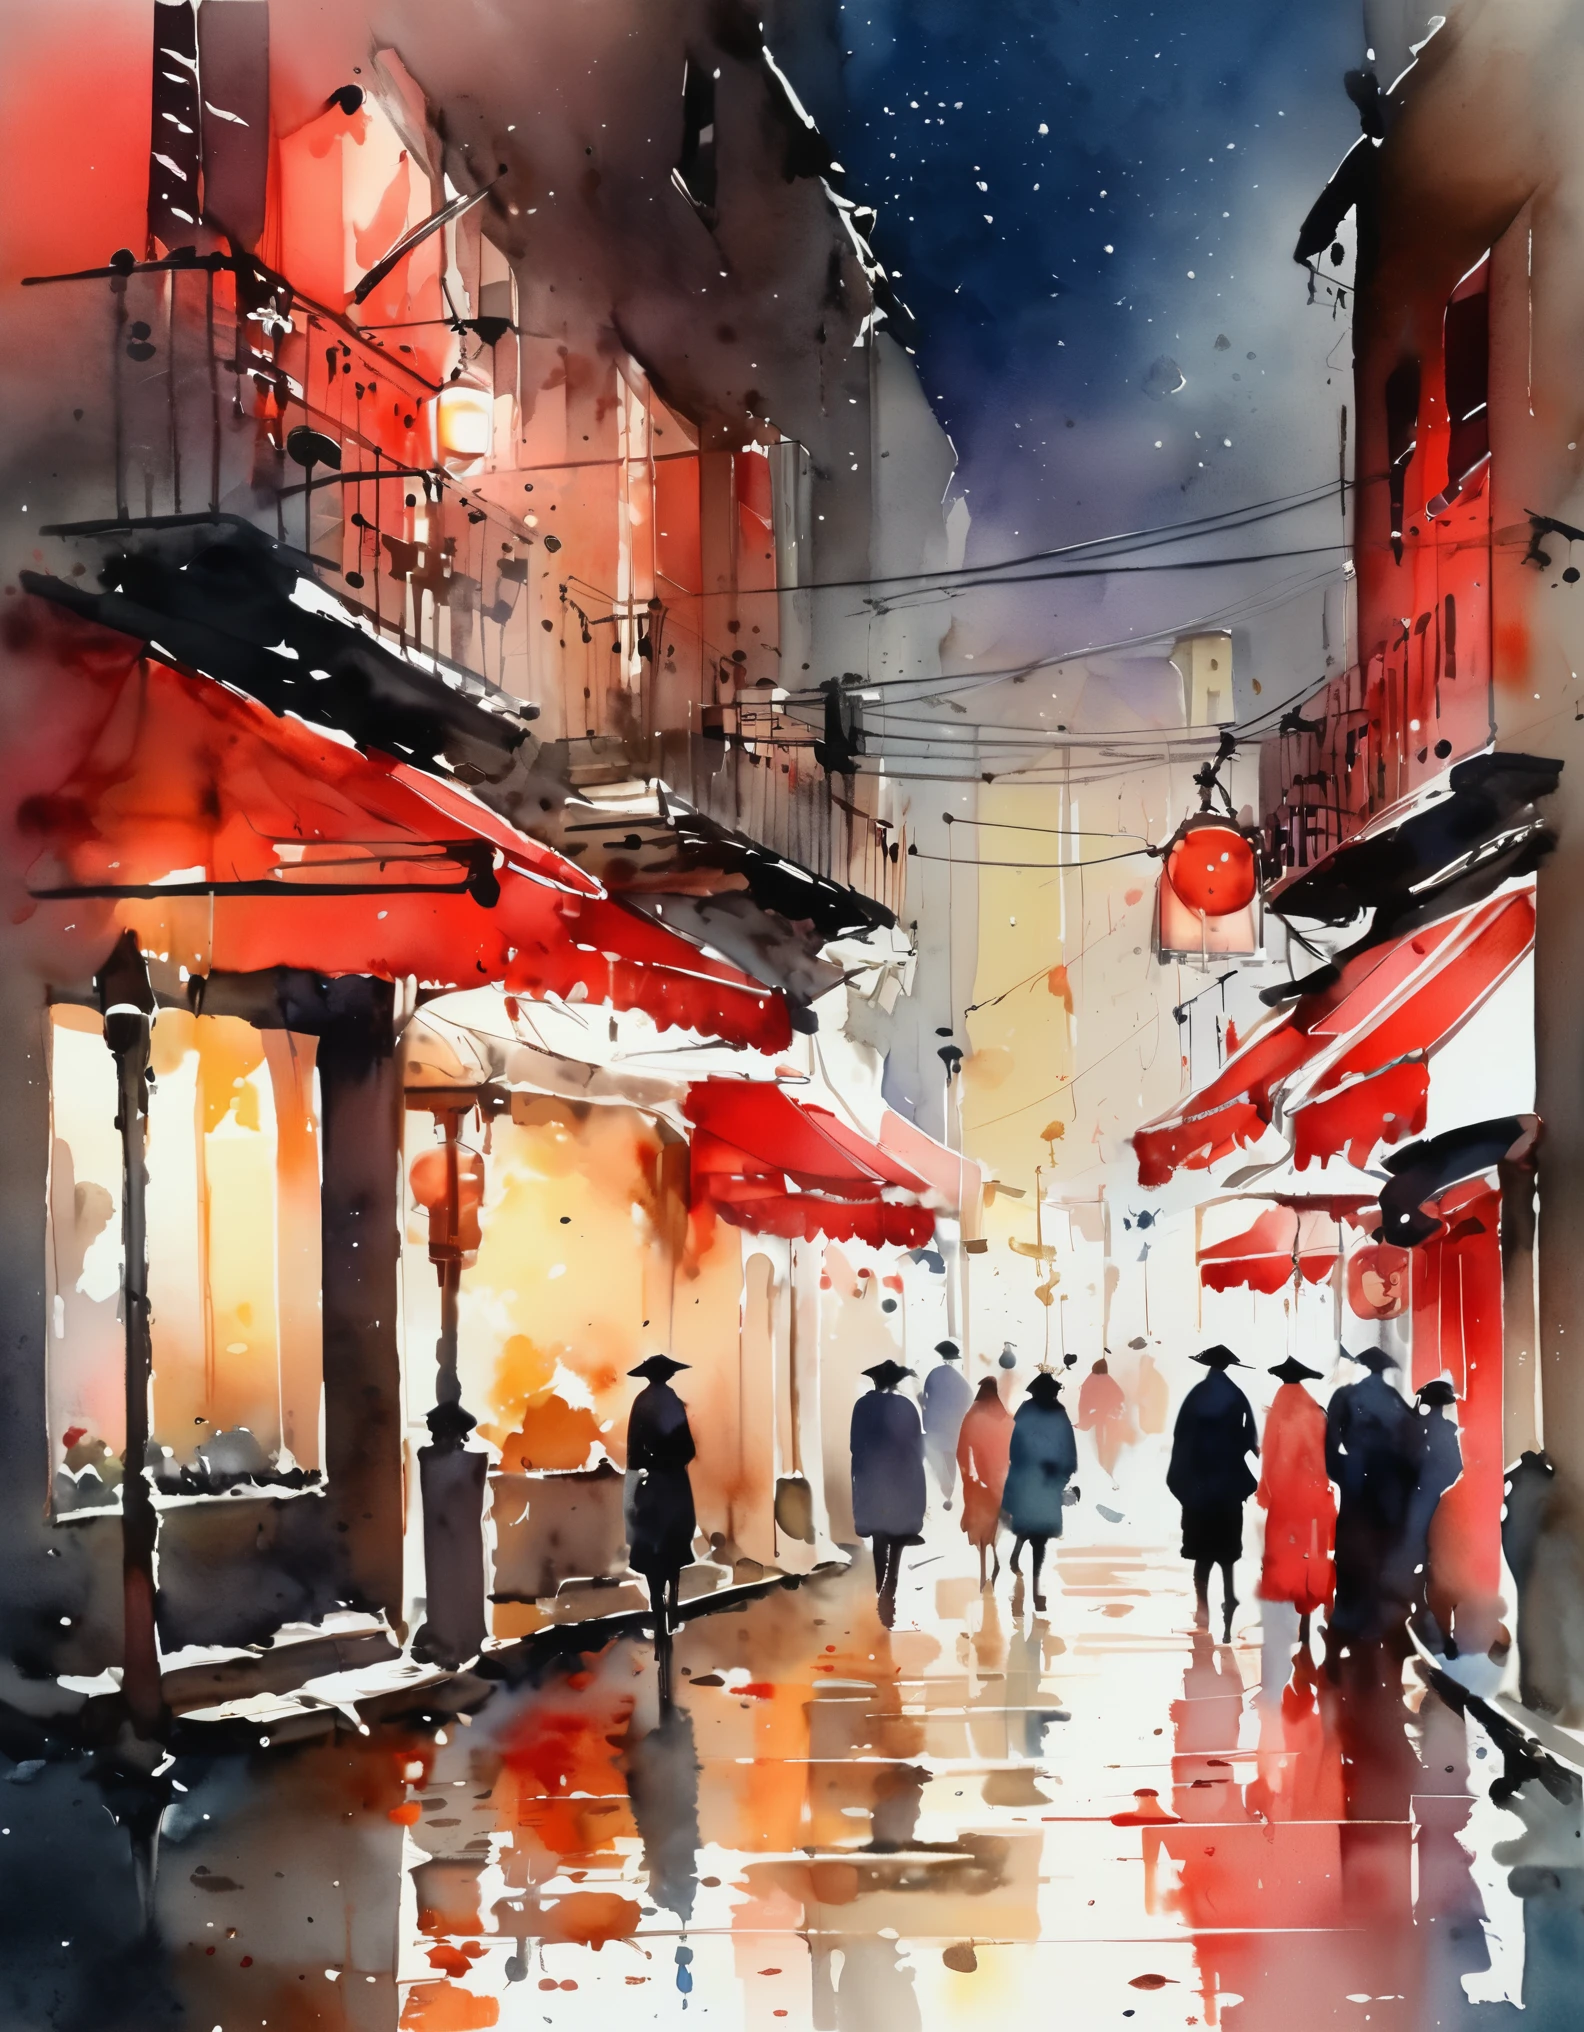 best quality, super fine, 16k, delicate and dynamic, superb watercolor landscape painting, A gorgeous red-light district at night, modern and retro, pop and classic, new and old, learning from the past, (magnificent view:1.7) , (watercolor techniques, bleeding, layering, dry brushing, sputtering, dripping, gradation, wiping)